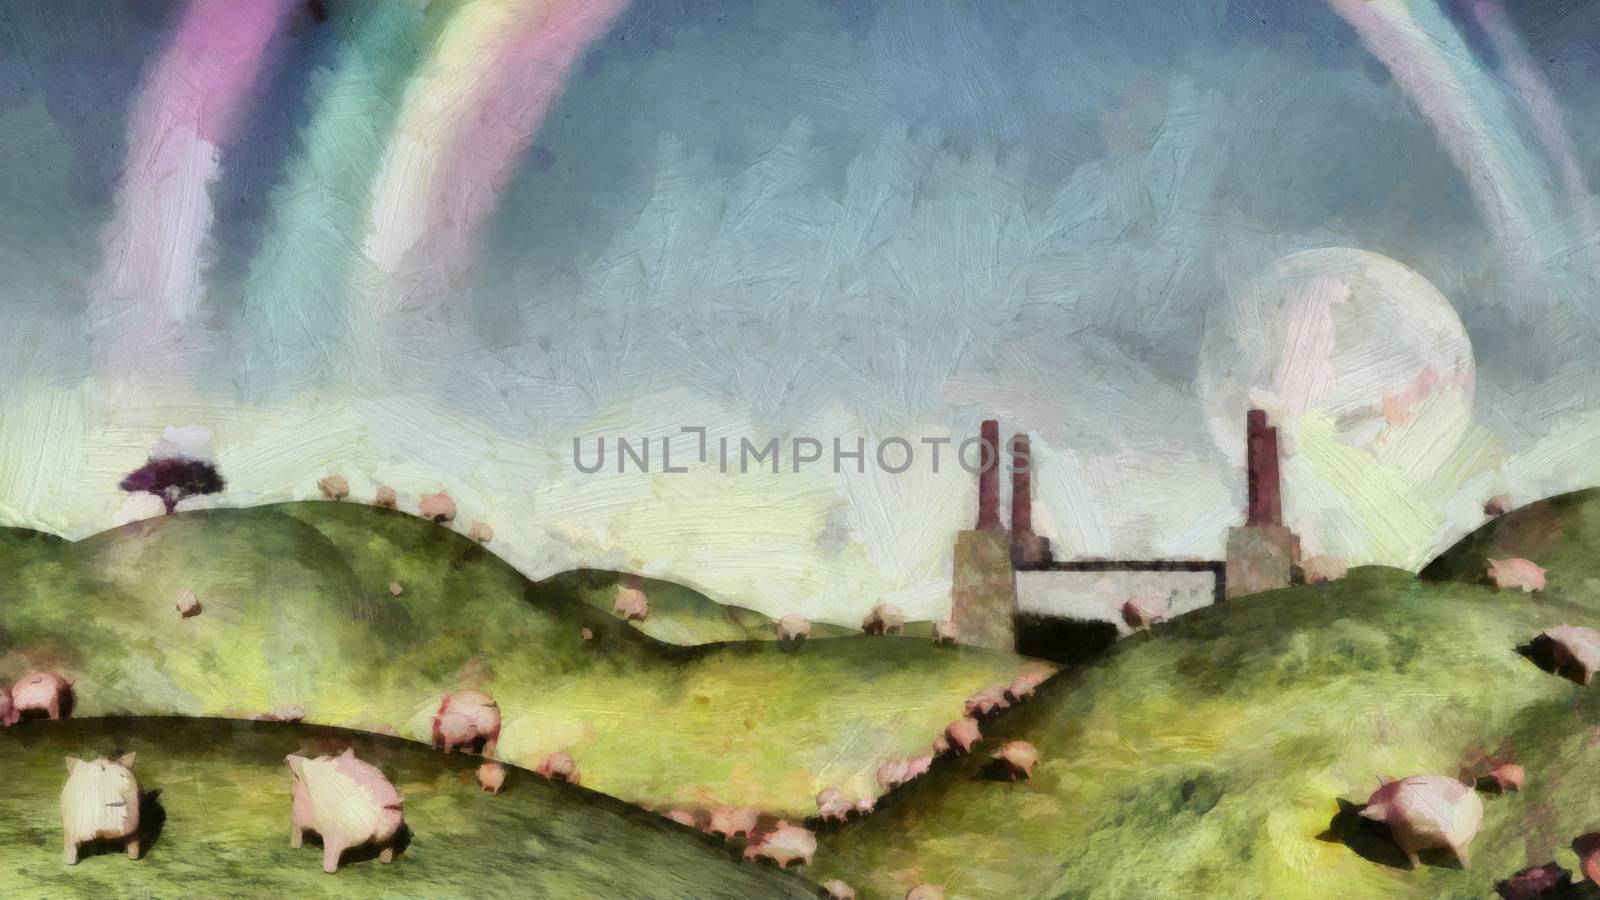 Surreal painting. Pigs in the field. Factory at the horizon. Rainbow in the sky.